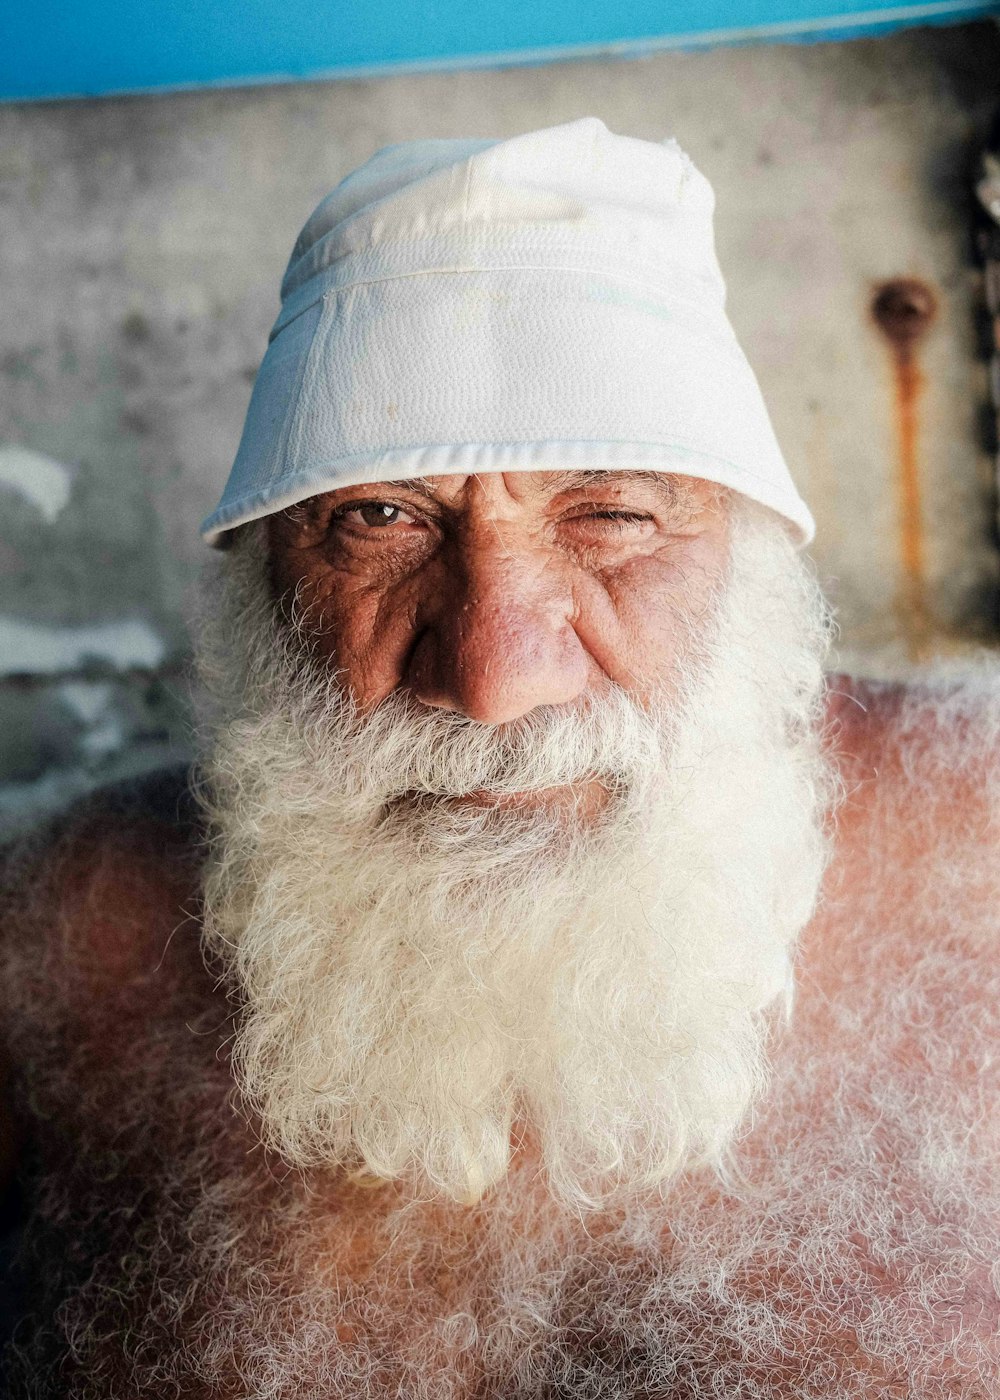 an old man with a white beard wearing a white hat